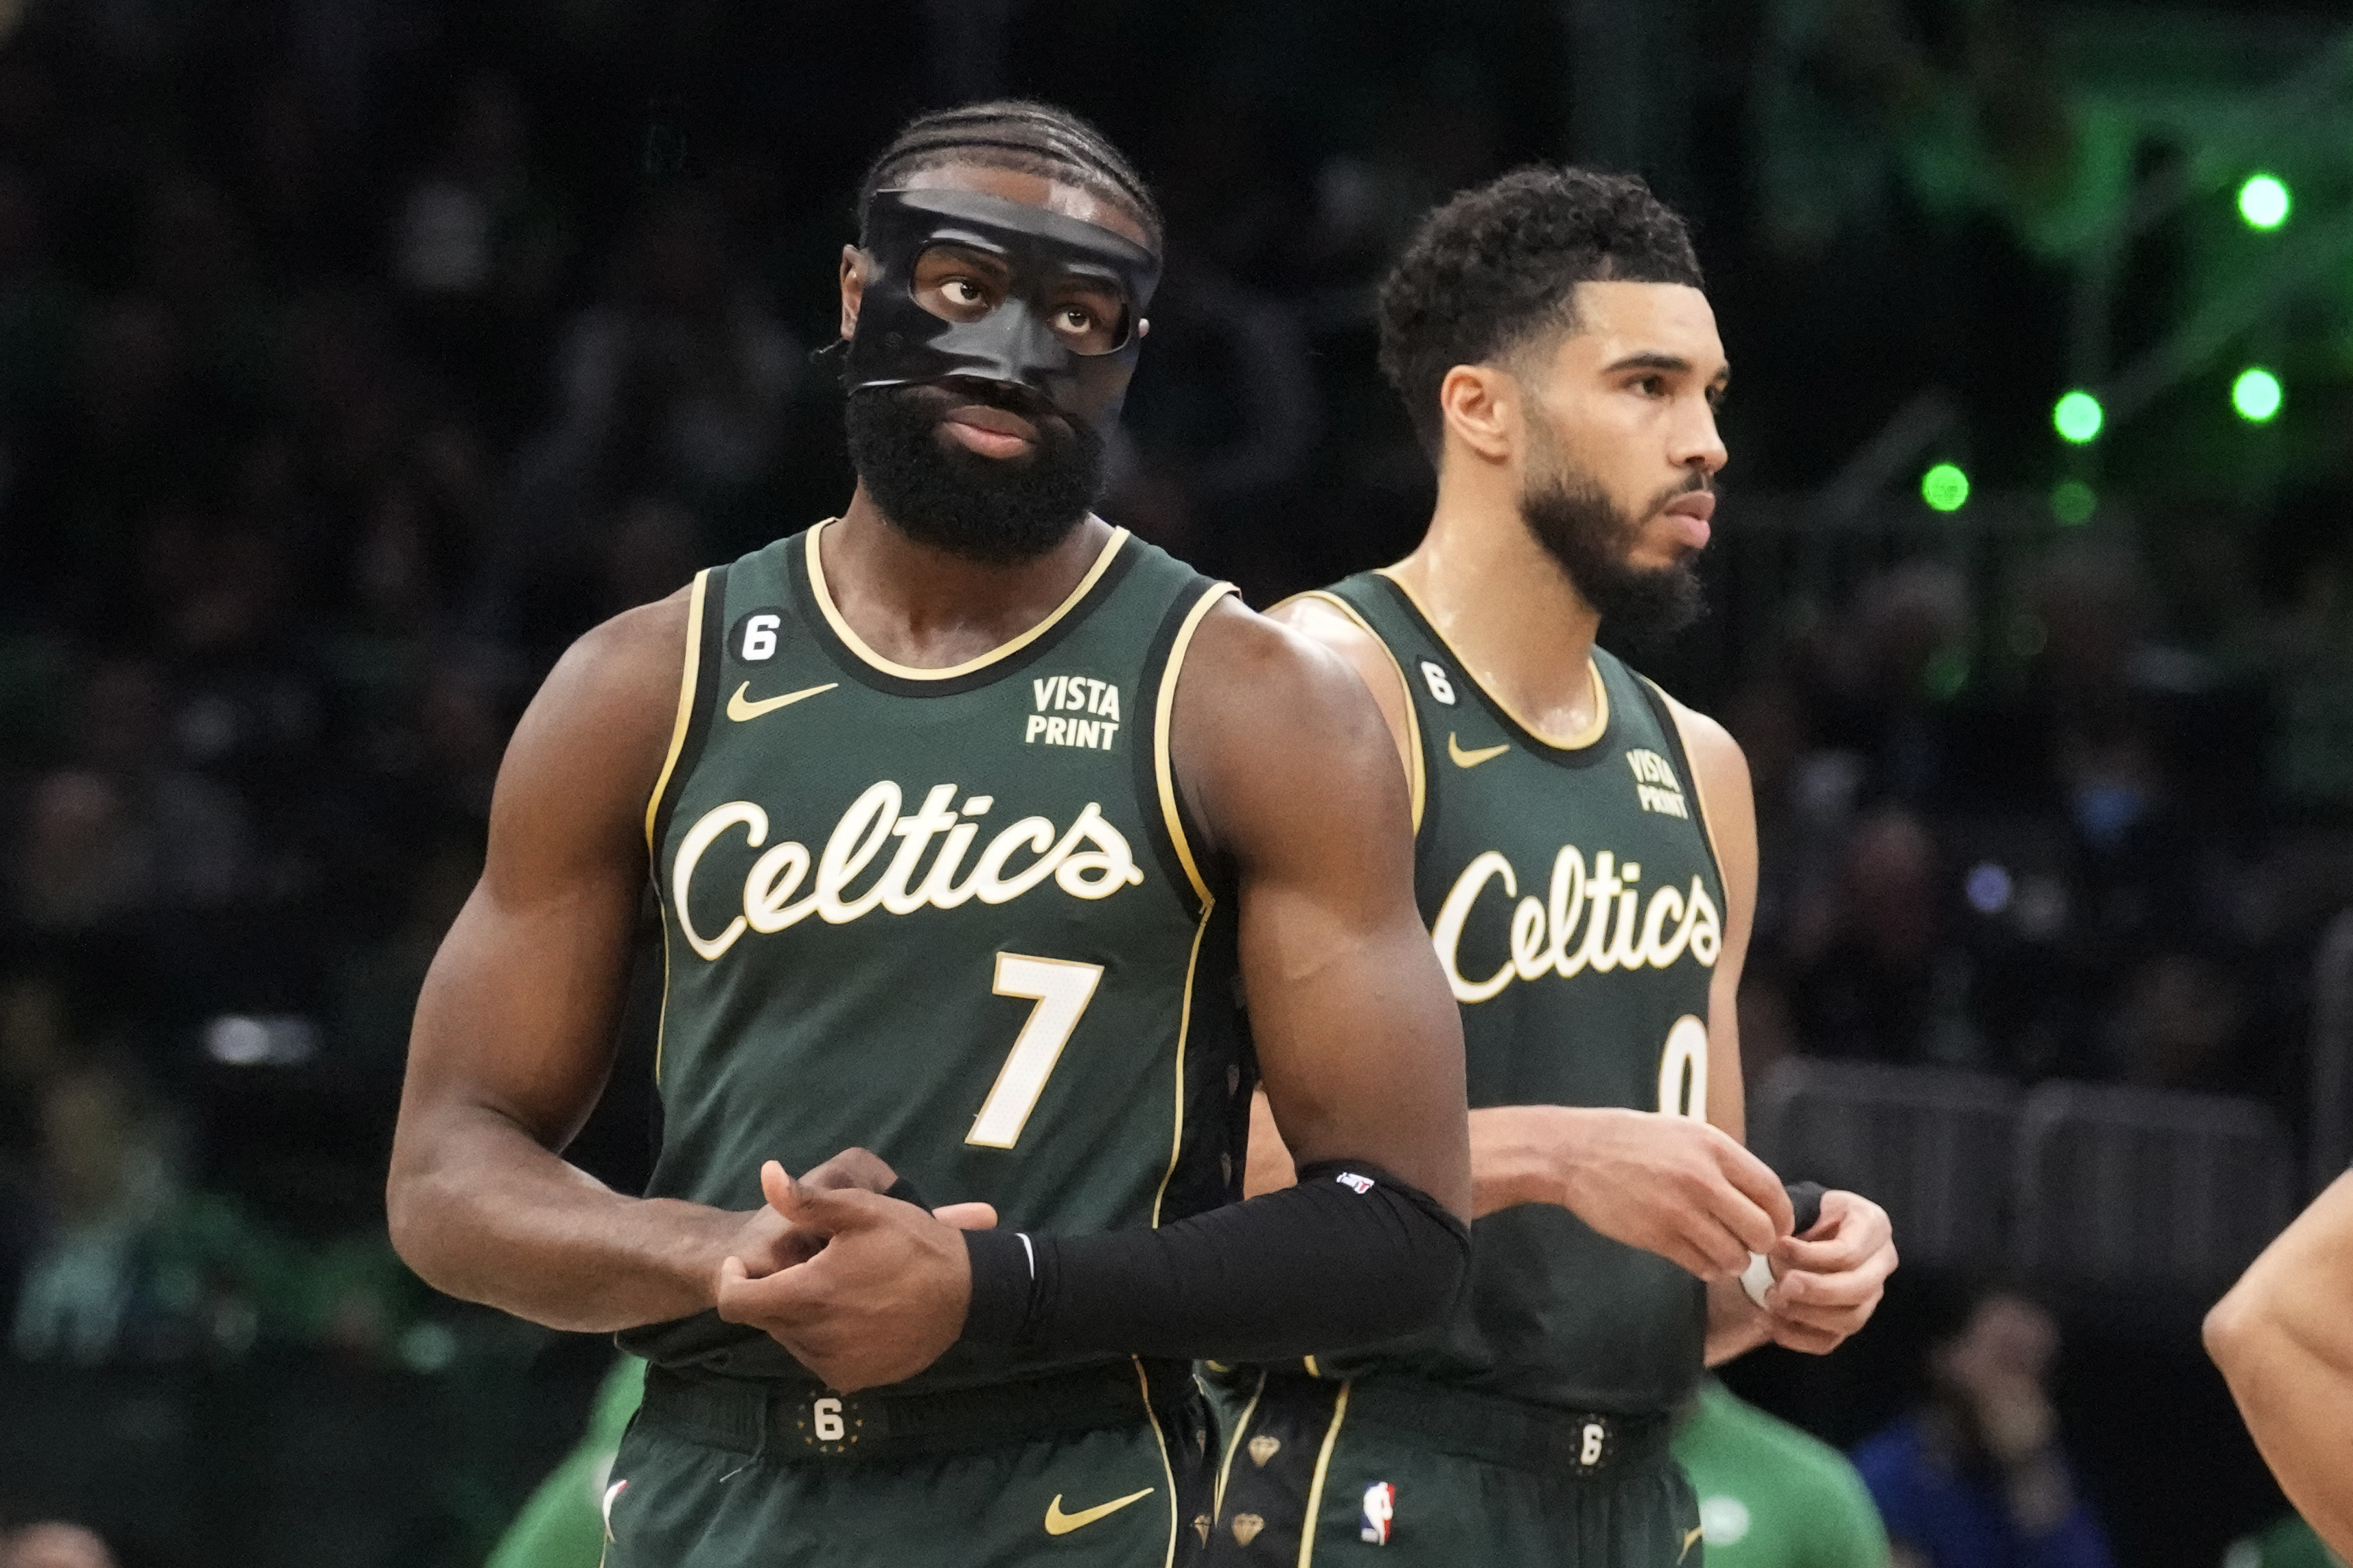 2023-2024 Celtics City Jerseys have been released!!! What are your